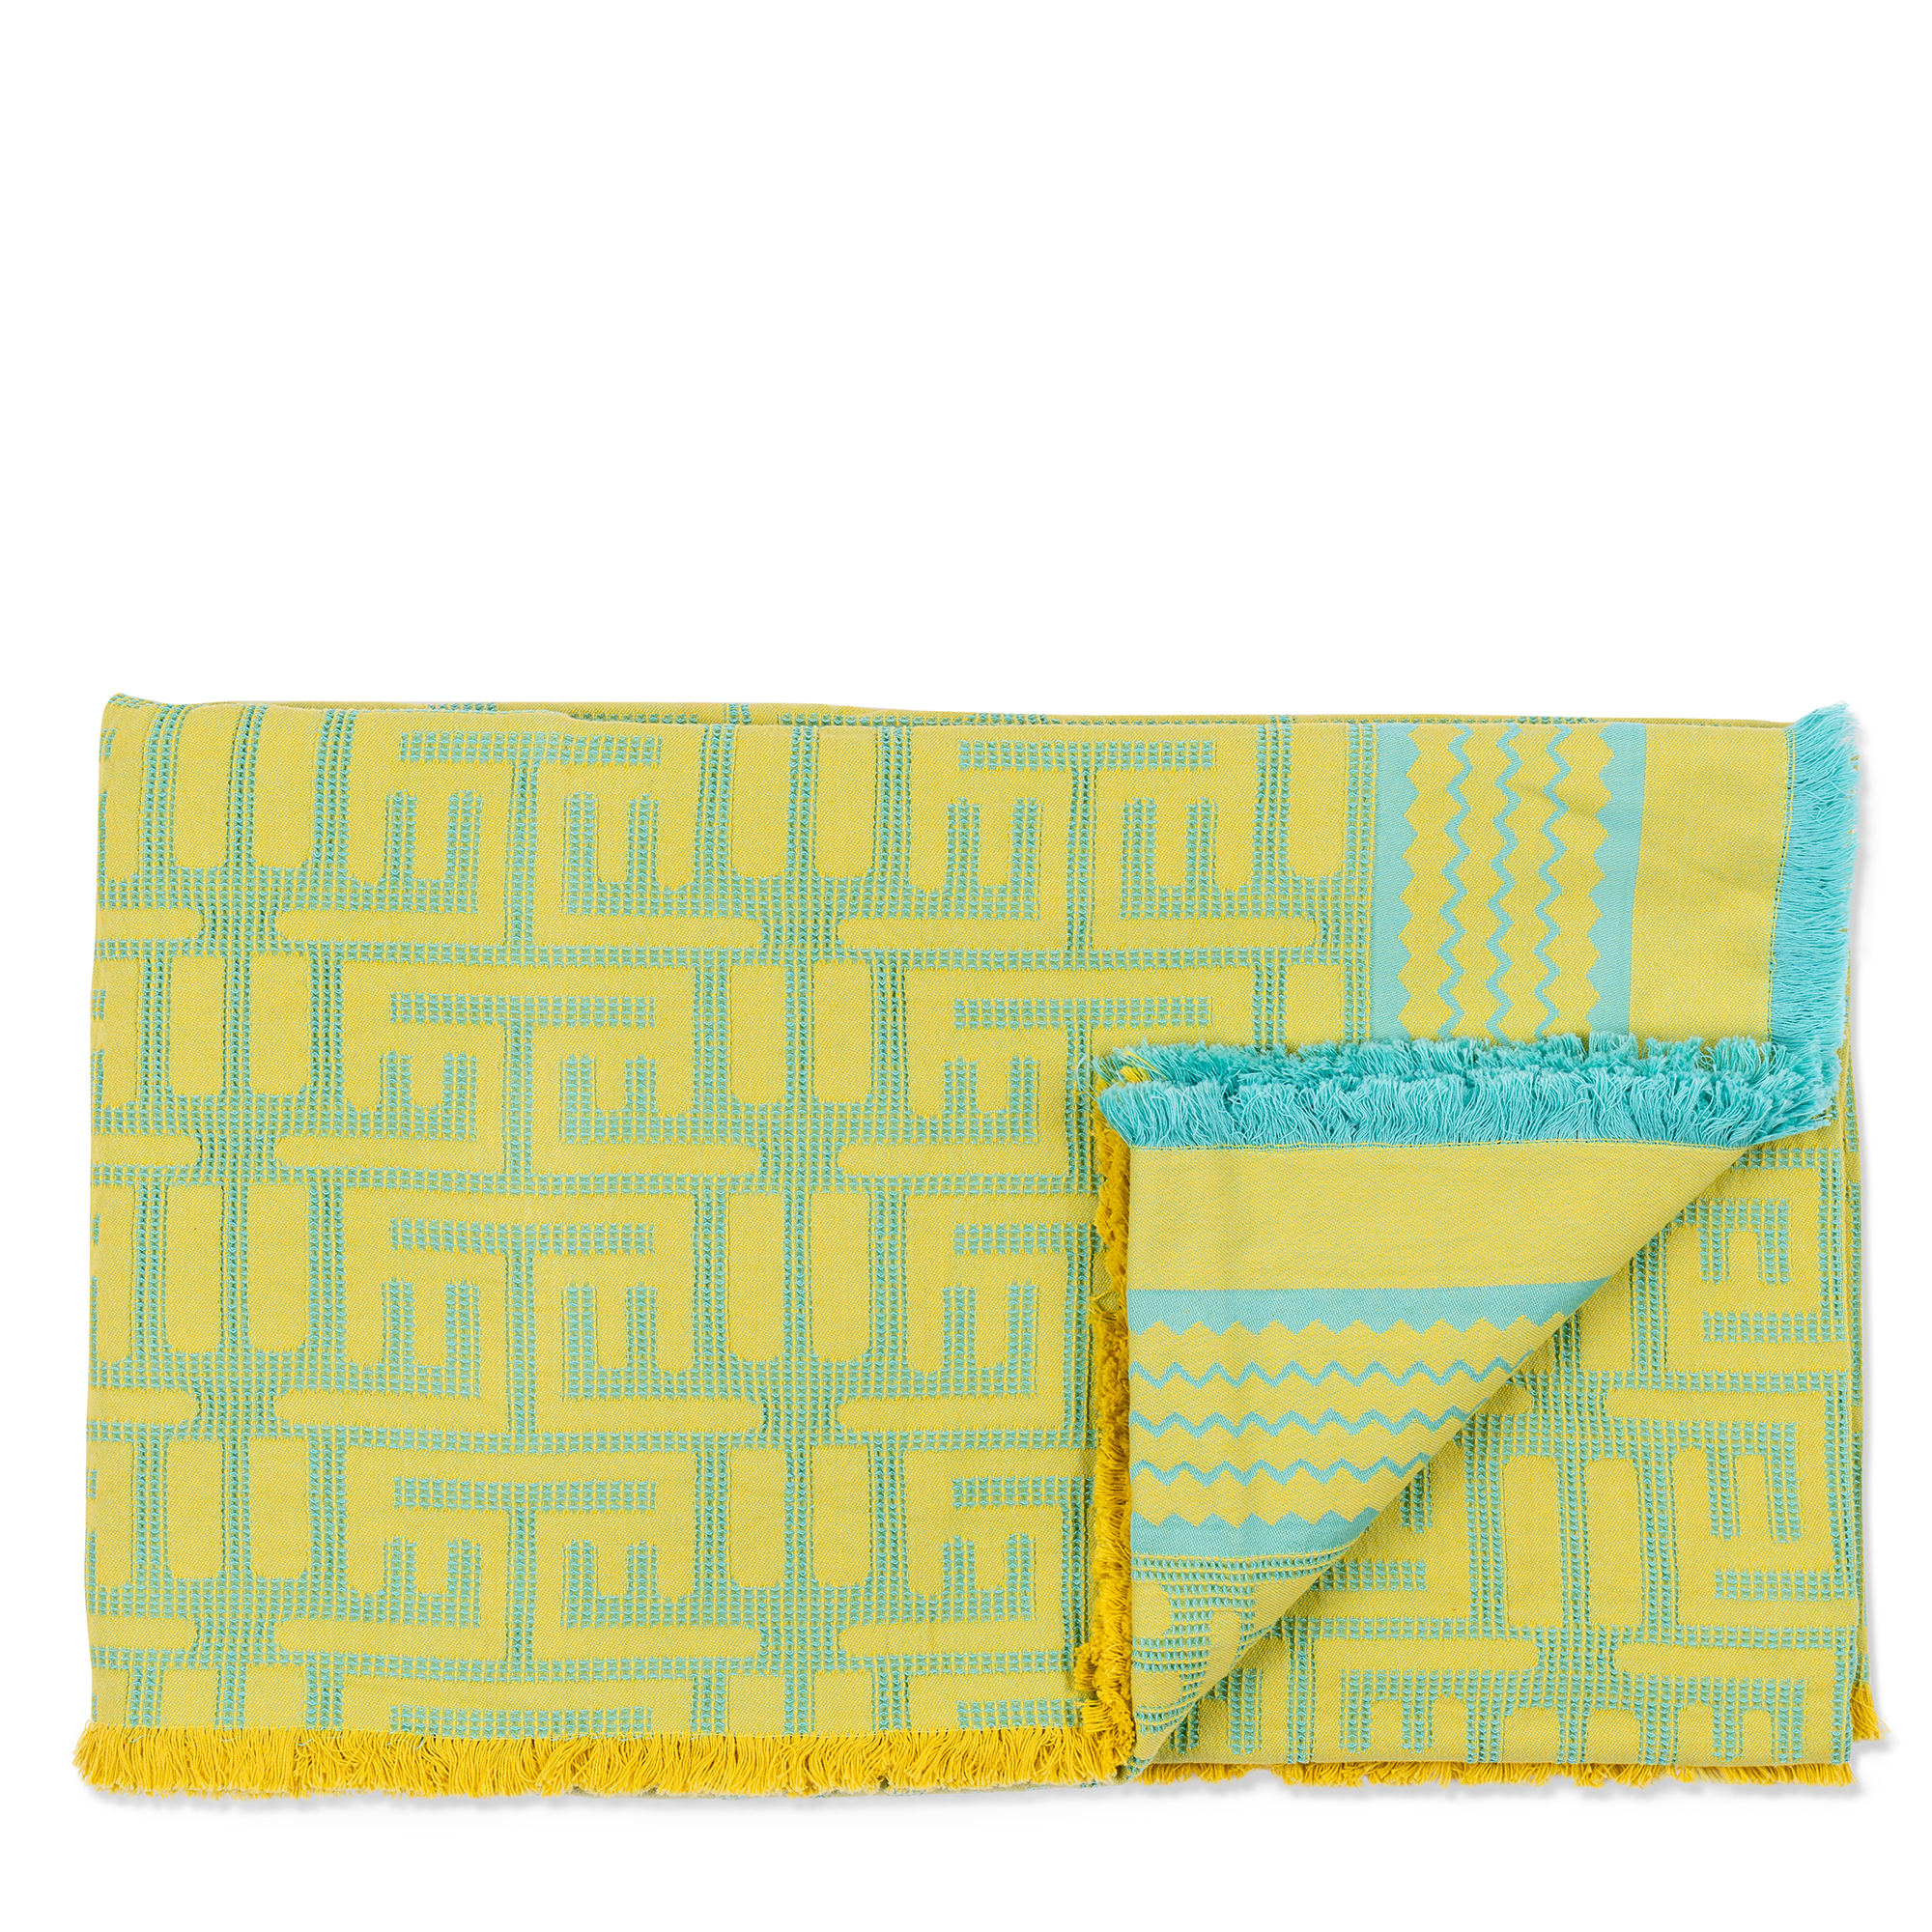 This yellow and turquoise beach mat with a geometric pattern, featuring 100% cotton fabric is lightweight and portable, ideal for beach outings and picnics.